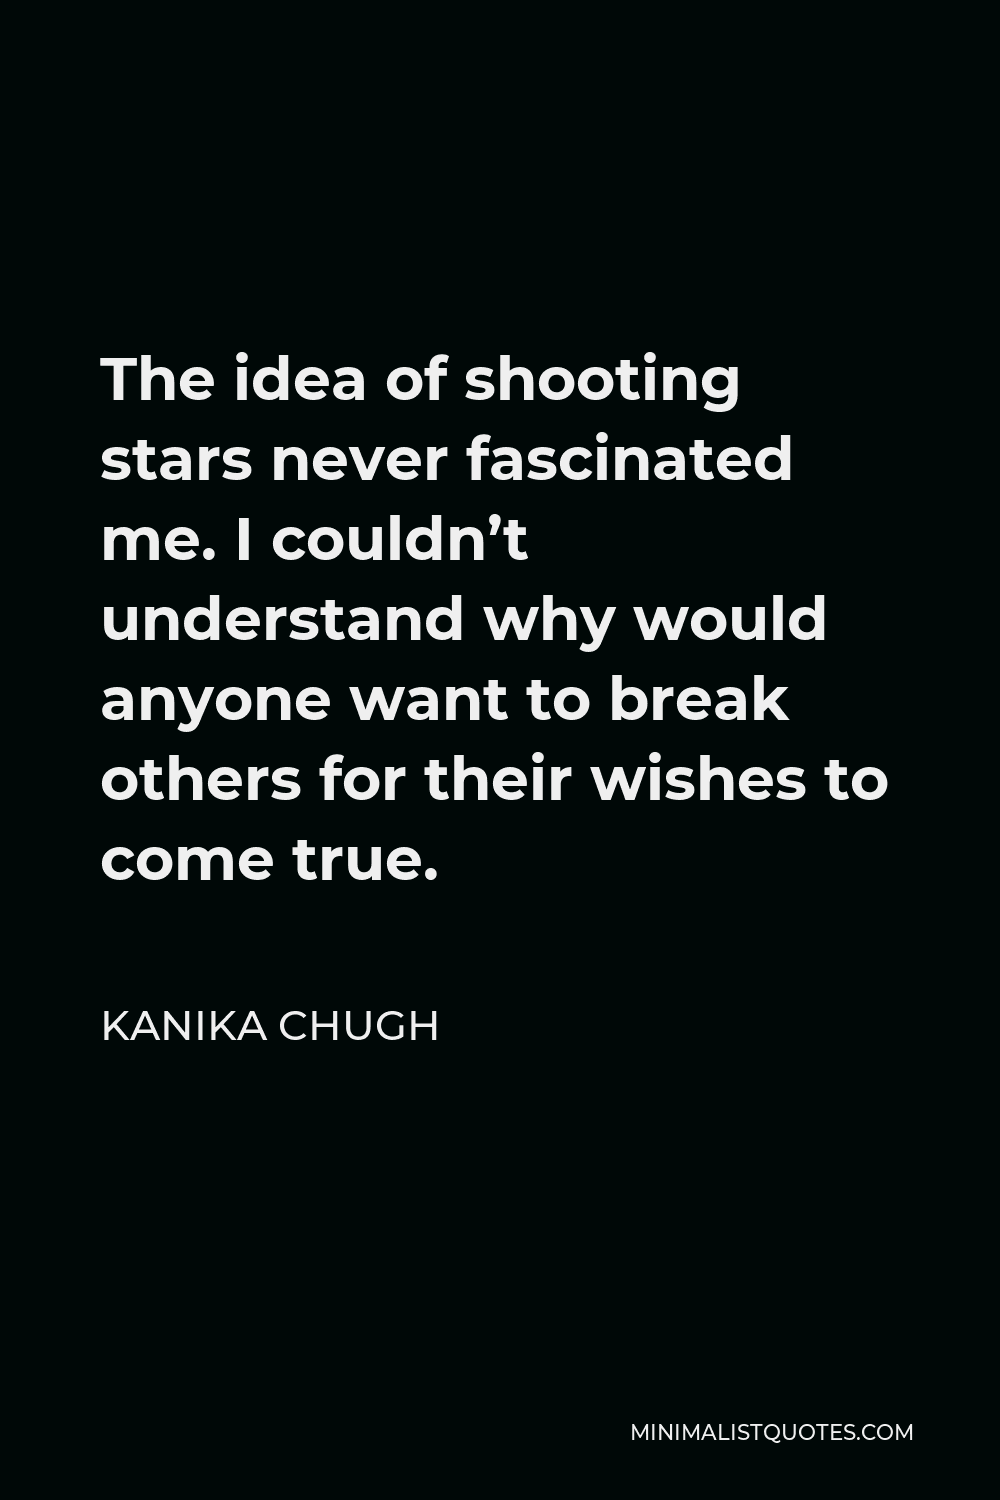 Kanika Chugh Quote - The idea of shooting stars never fascinated me. I couldn’t understand why would anyone want to break others for their wishes to come true.